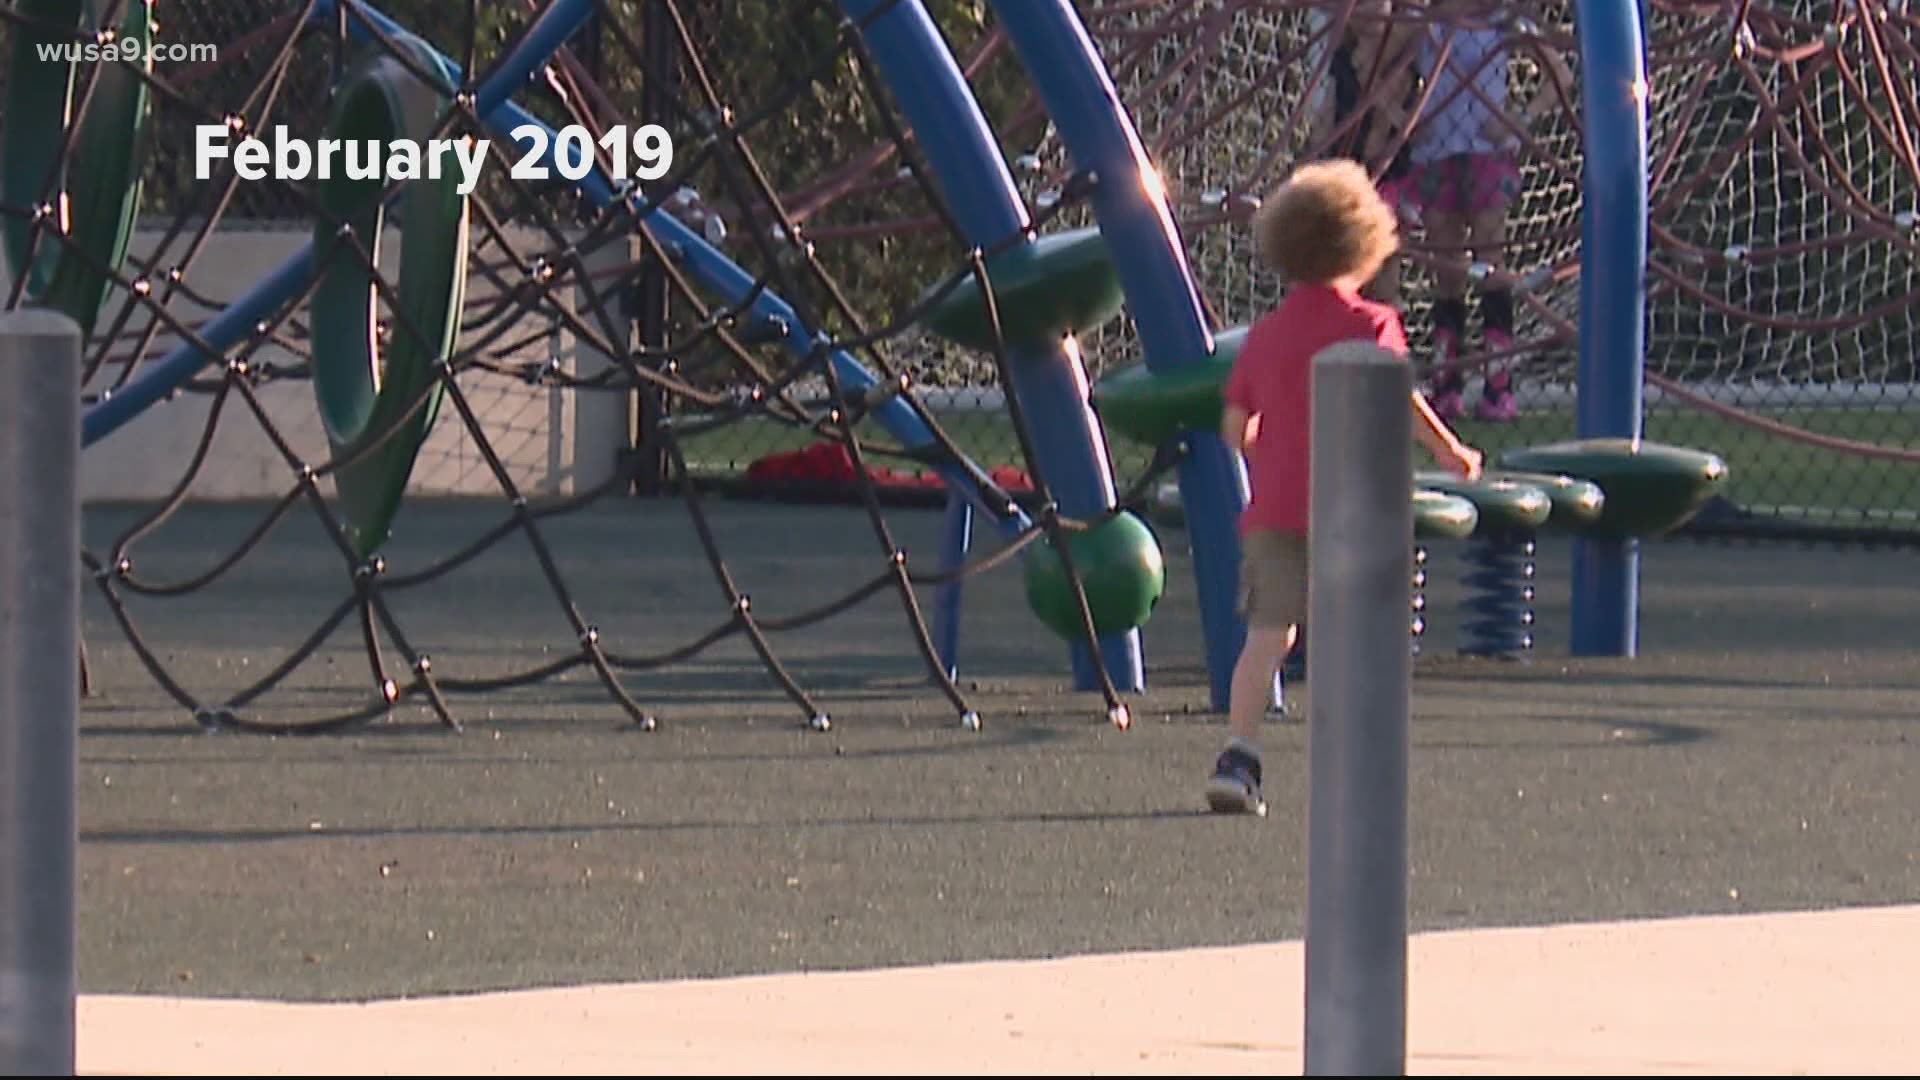 DC Councilmembers are demanding action on potentially toxic lead dangers at D.C. public school playgrounds first exposed by WUSA9.